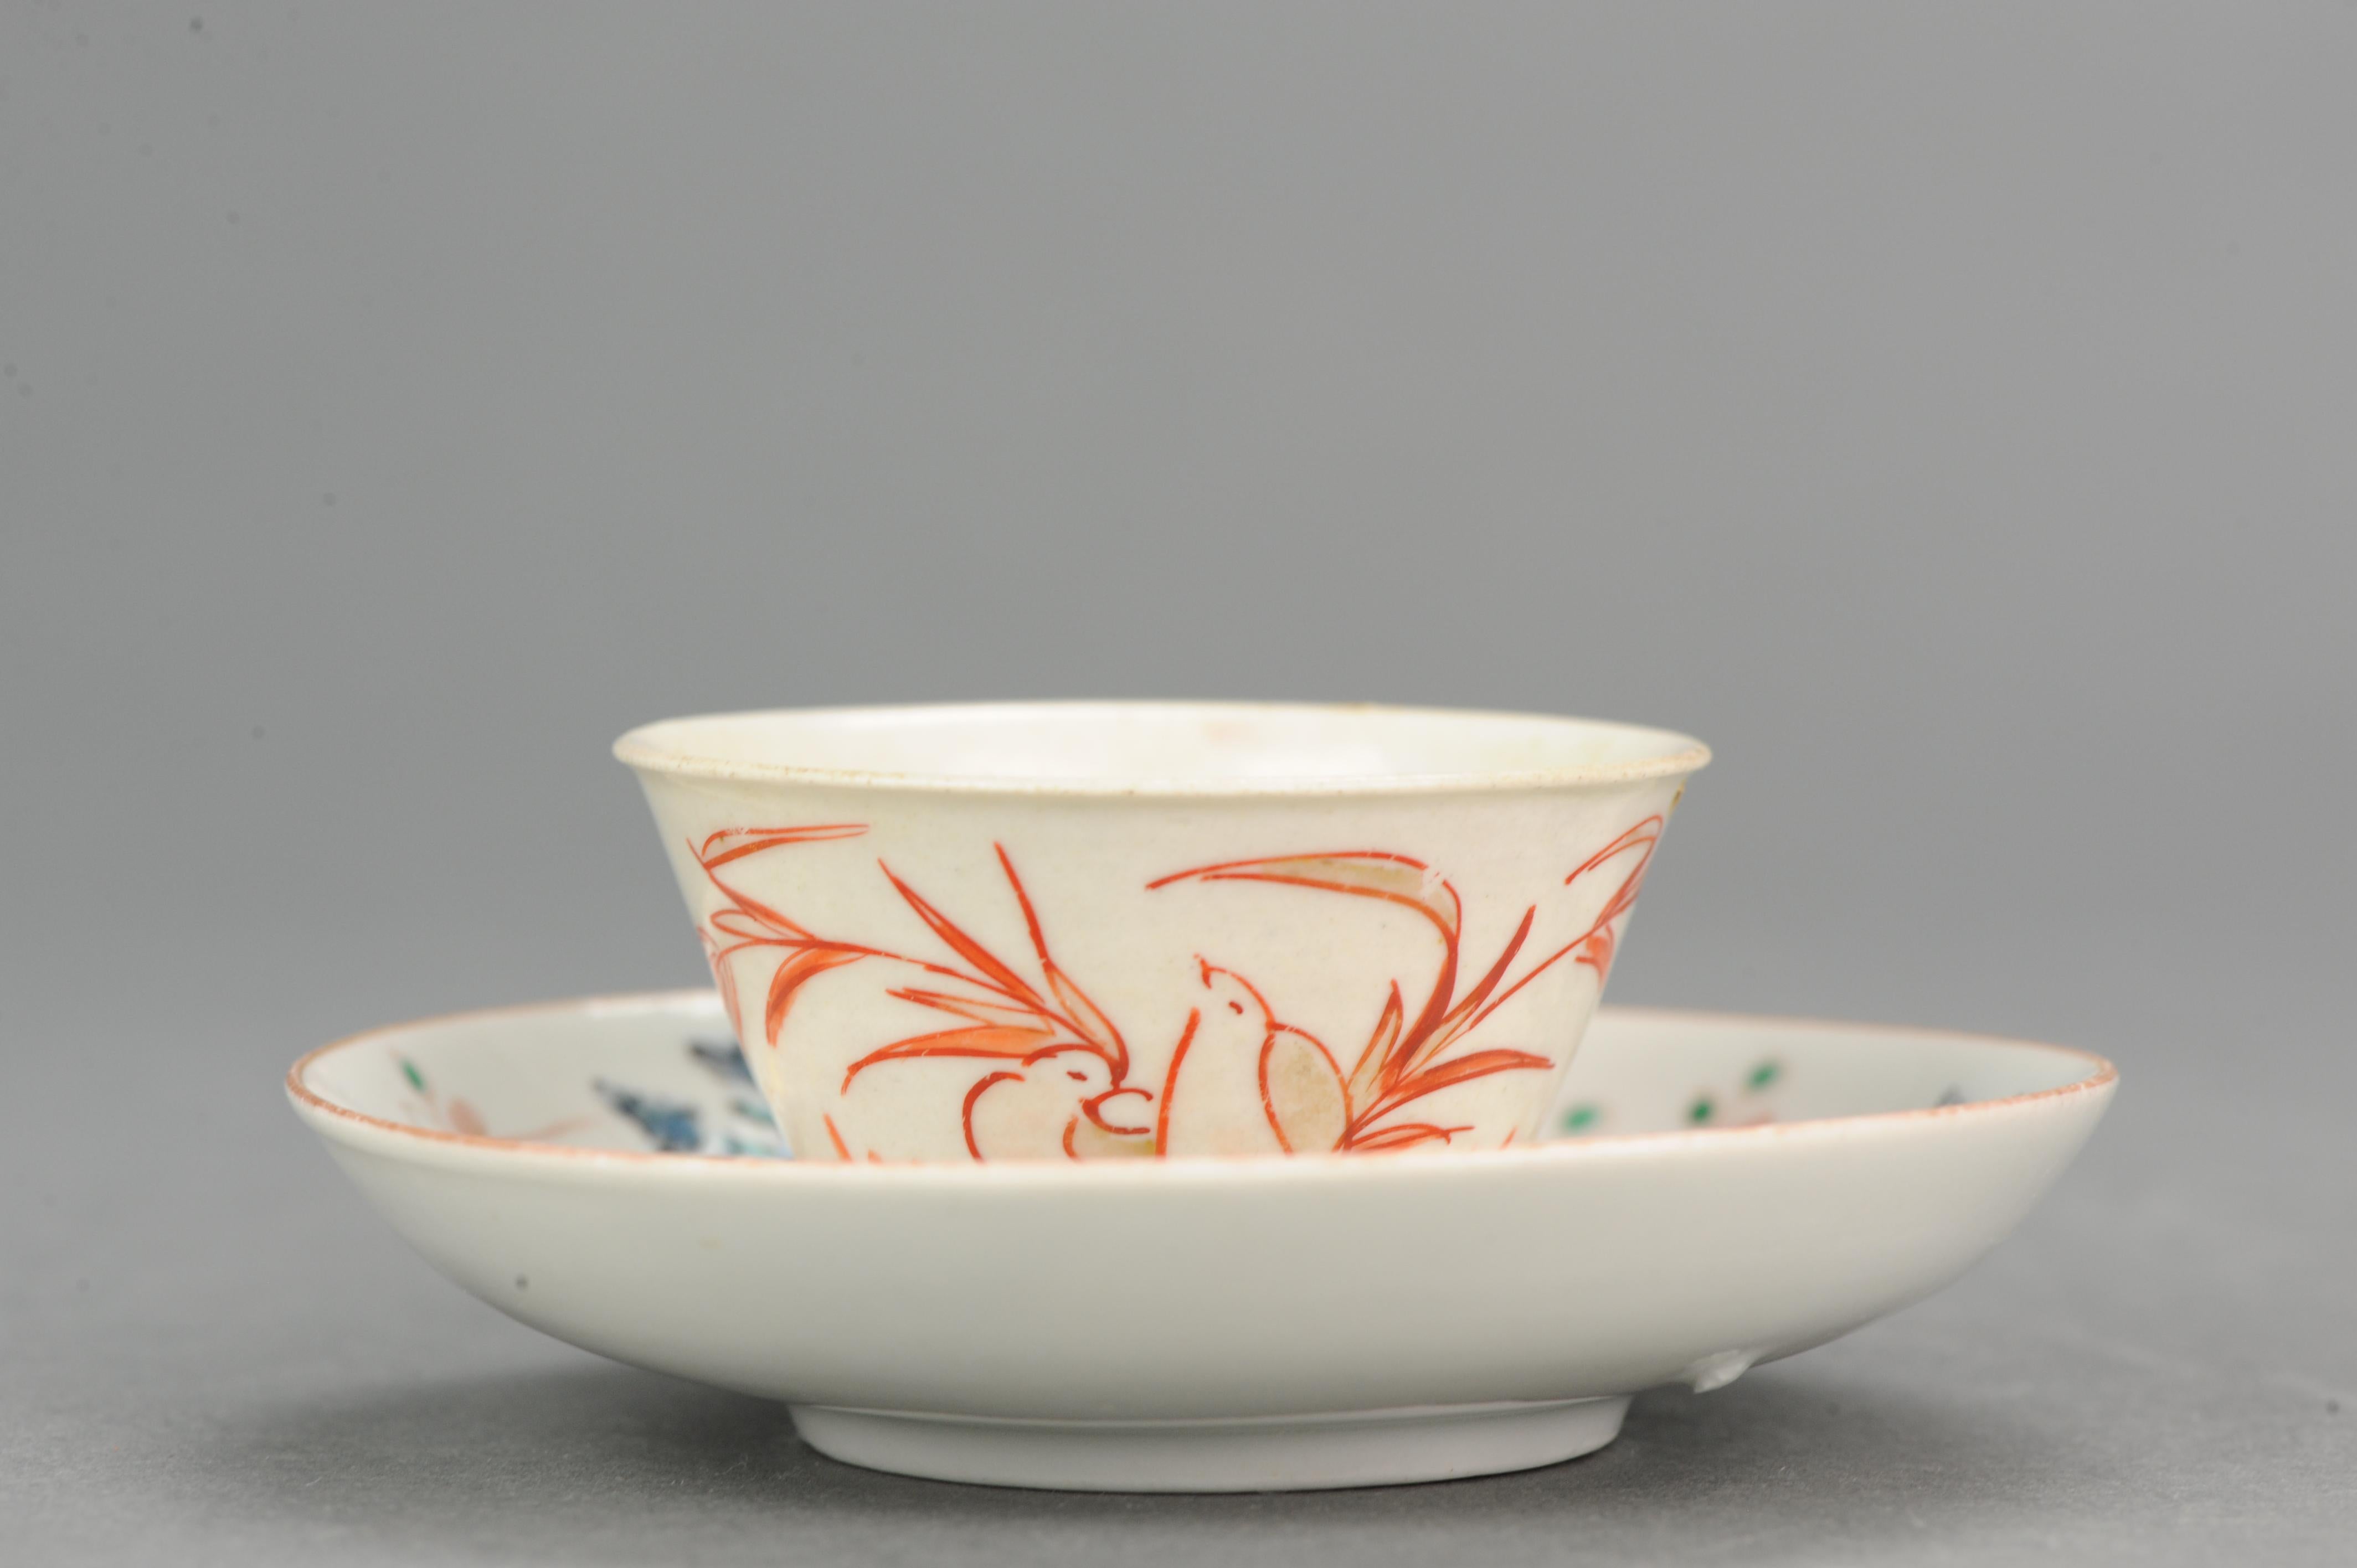 Lovely set of Japanese porcelain Imari.

Additional information:
Material: Porcelain 
Region of Origin: Japan
Period: 18th century Edo Period (1603–1867)
Condition: Perfect
Dimension: Large Ø 9.6 cm, Small Ø 5.6 cm